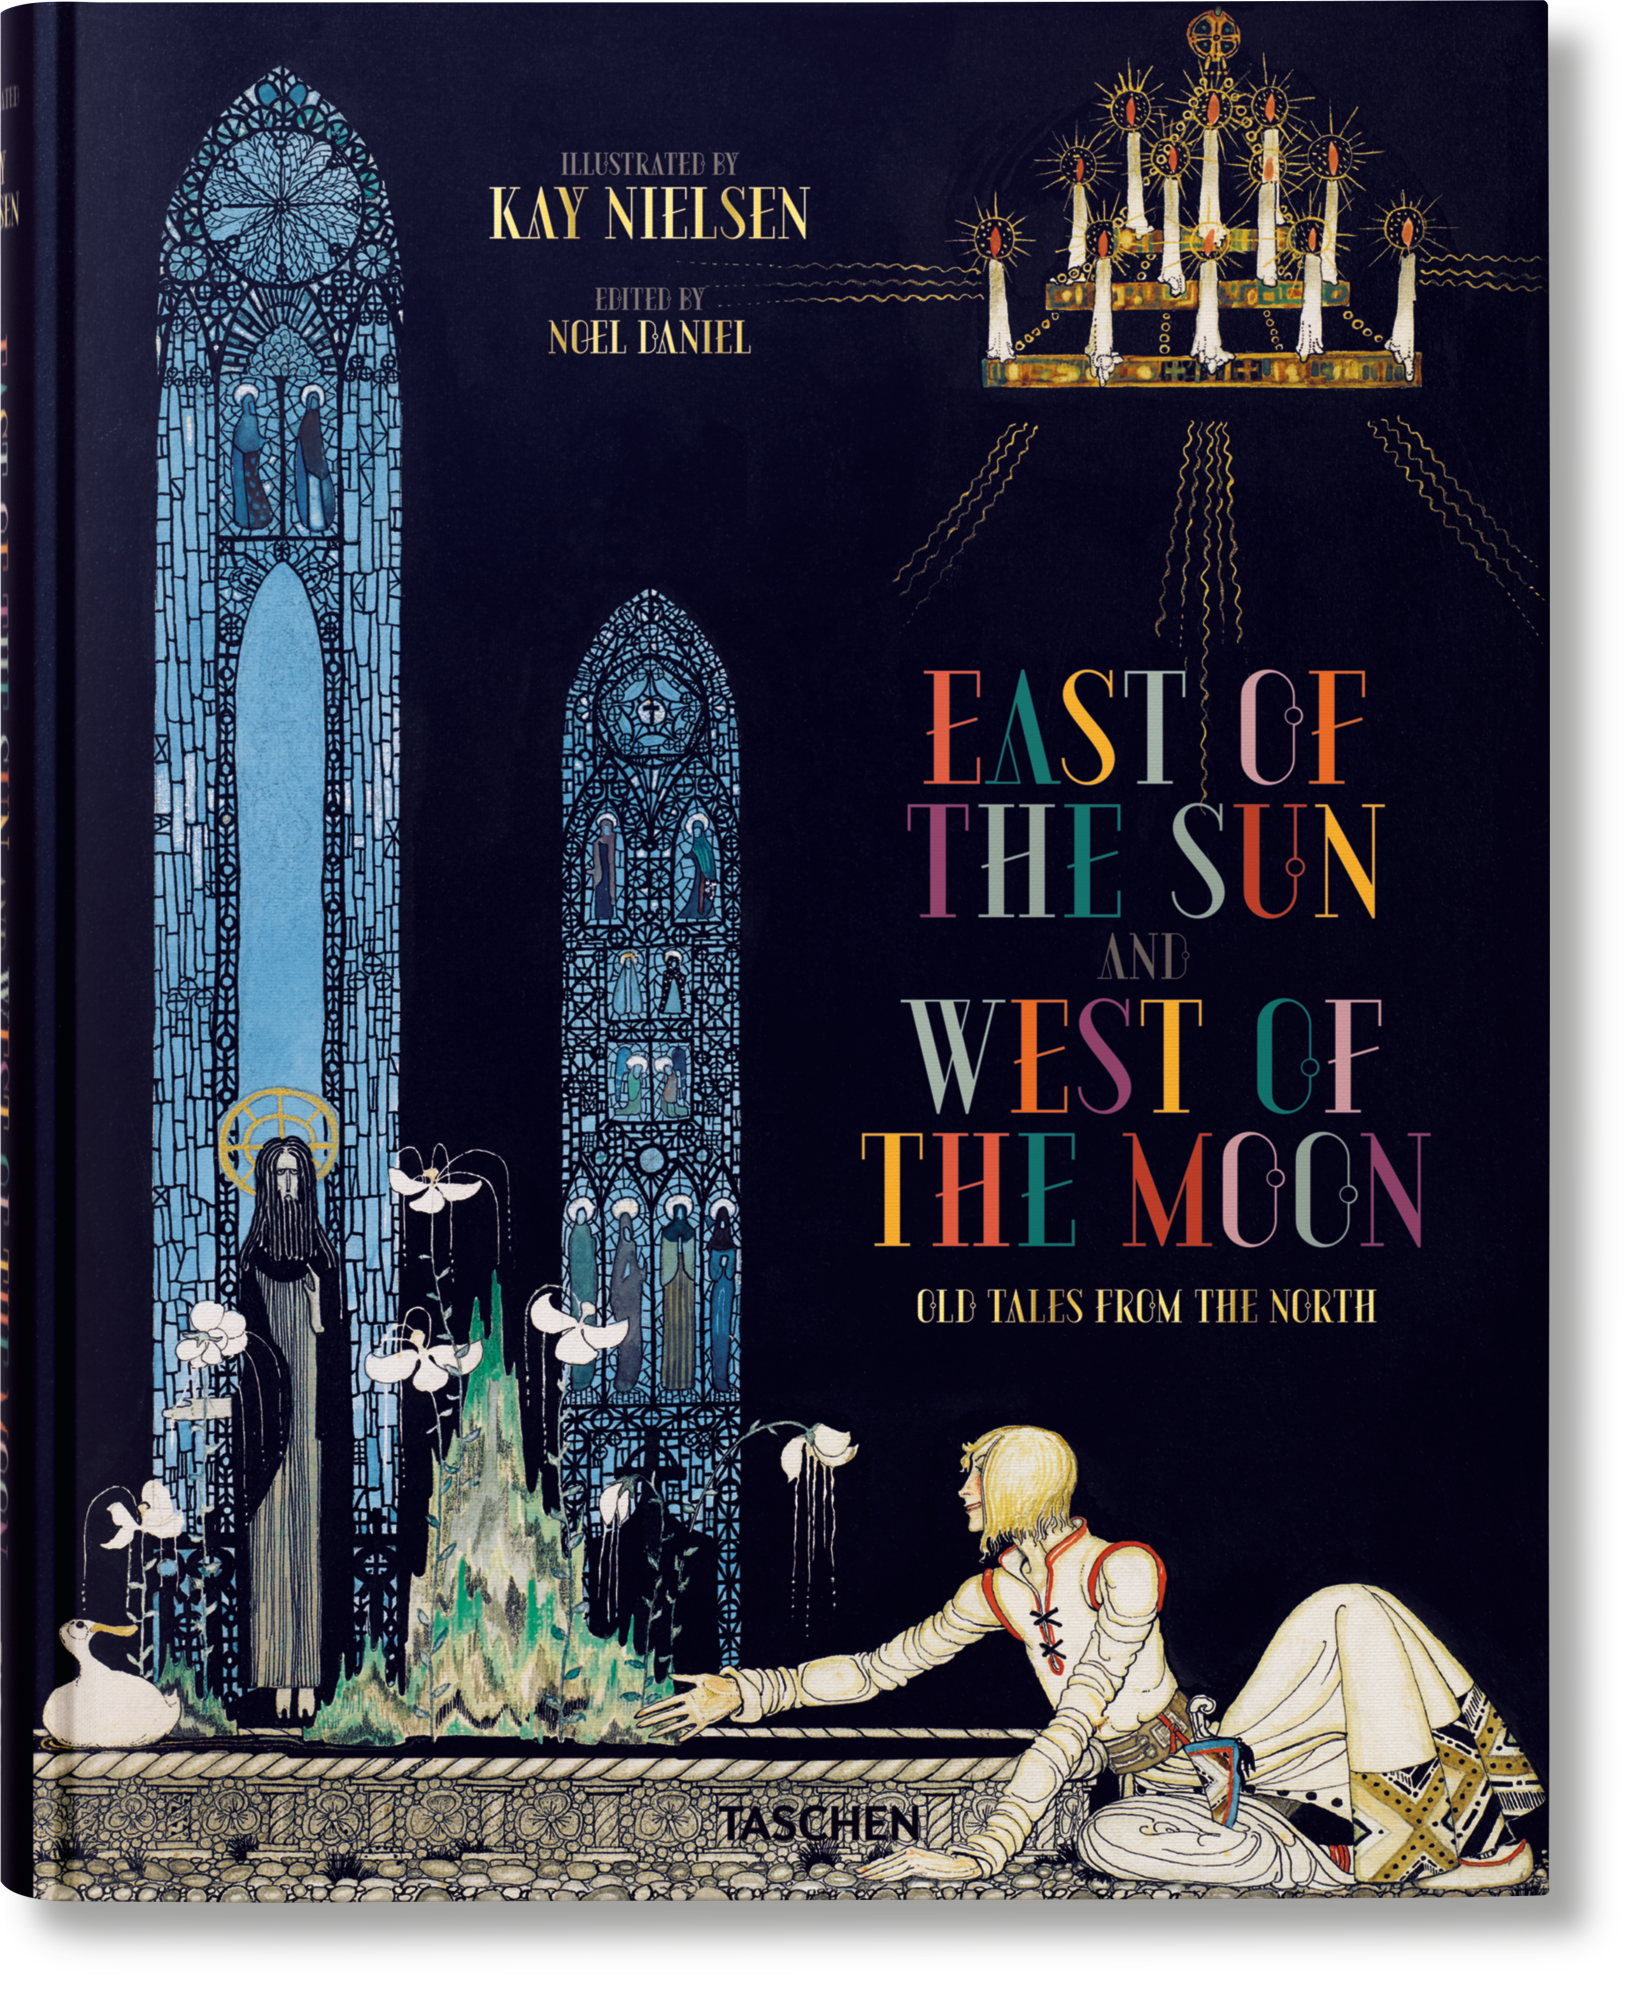 East of the Sun & West of the Moon by Kay Nielsen